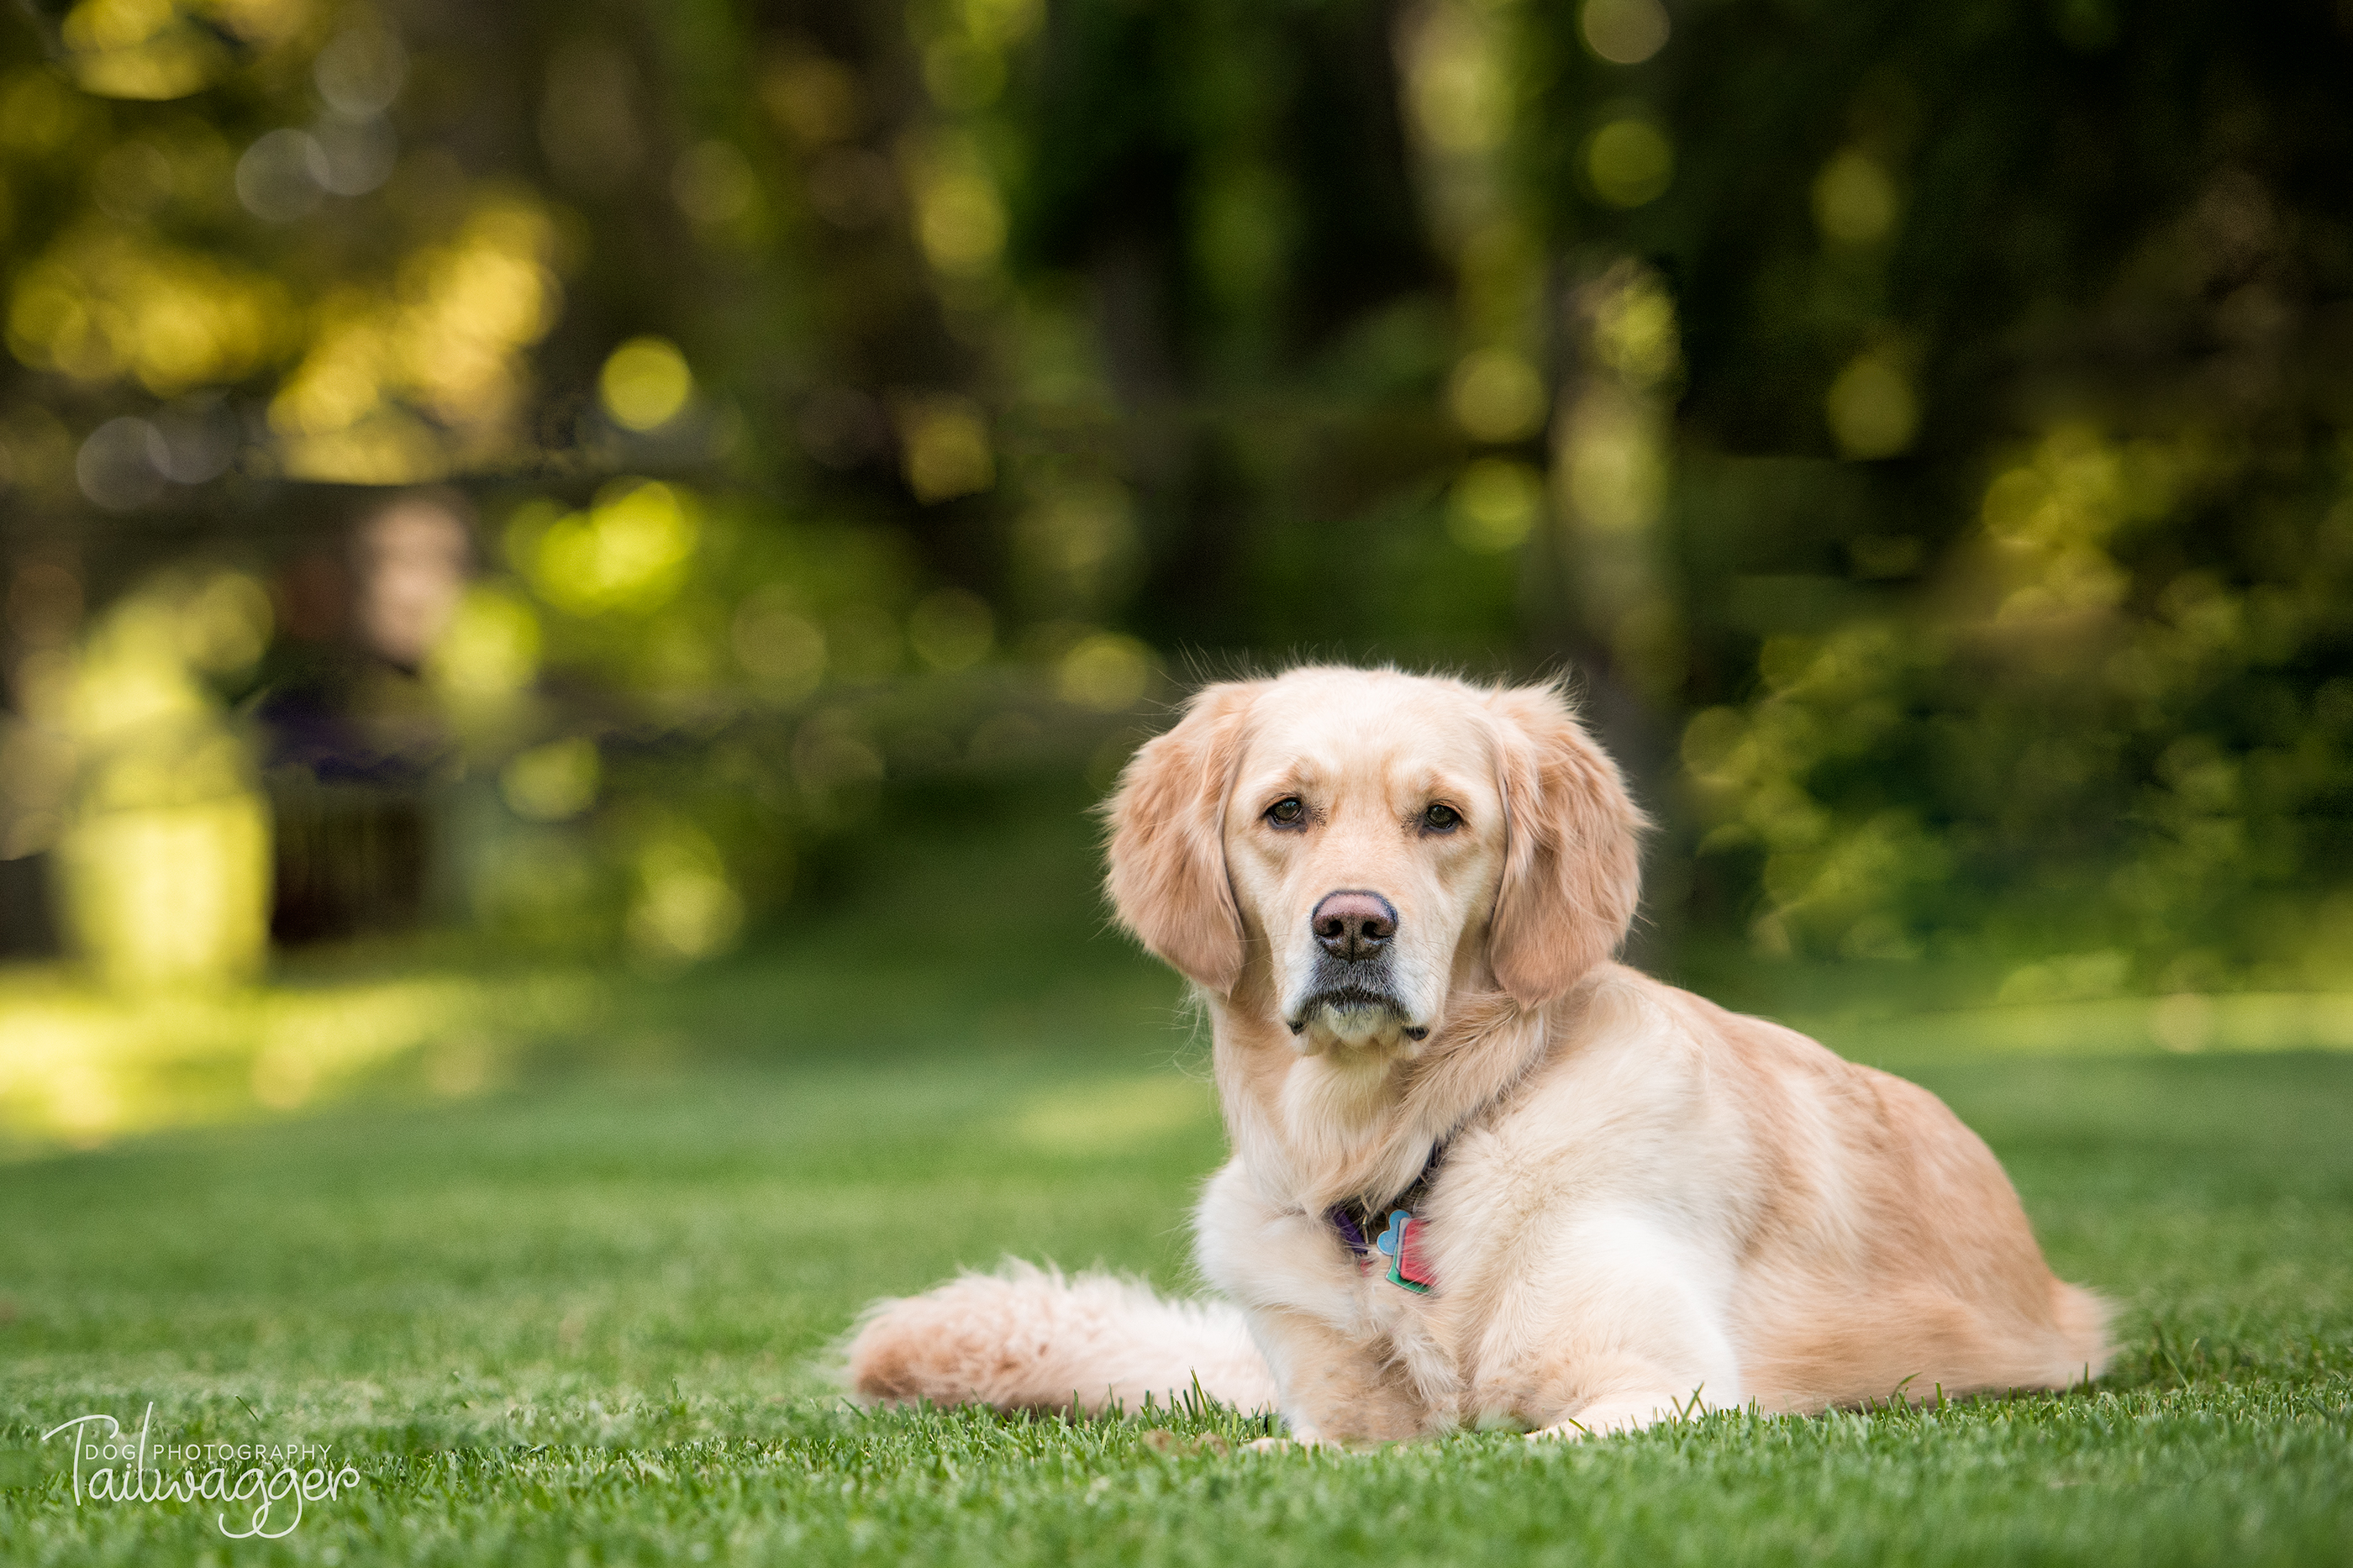 Female Golden Retriever dog lying in the grass at evening time.